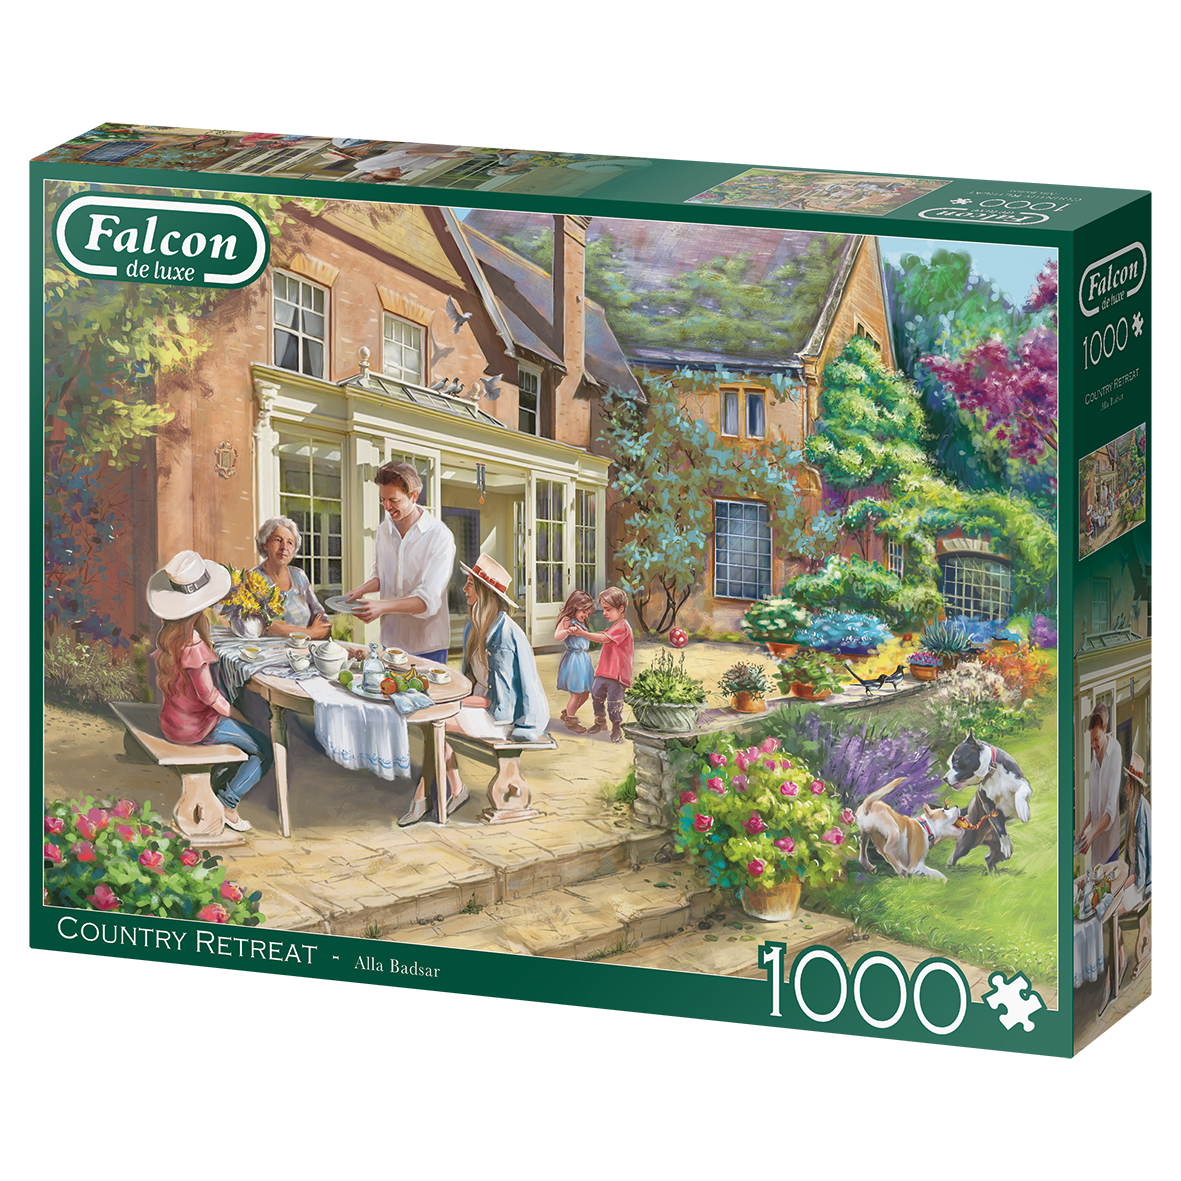 Falcon - Country Retreat (1000 pieces) - product image - Jumboplay.com